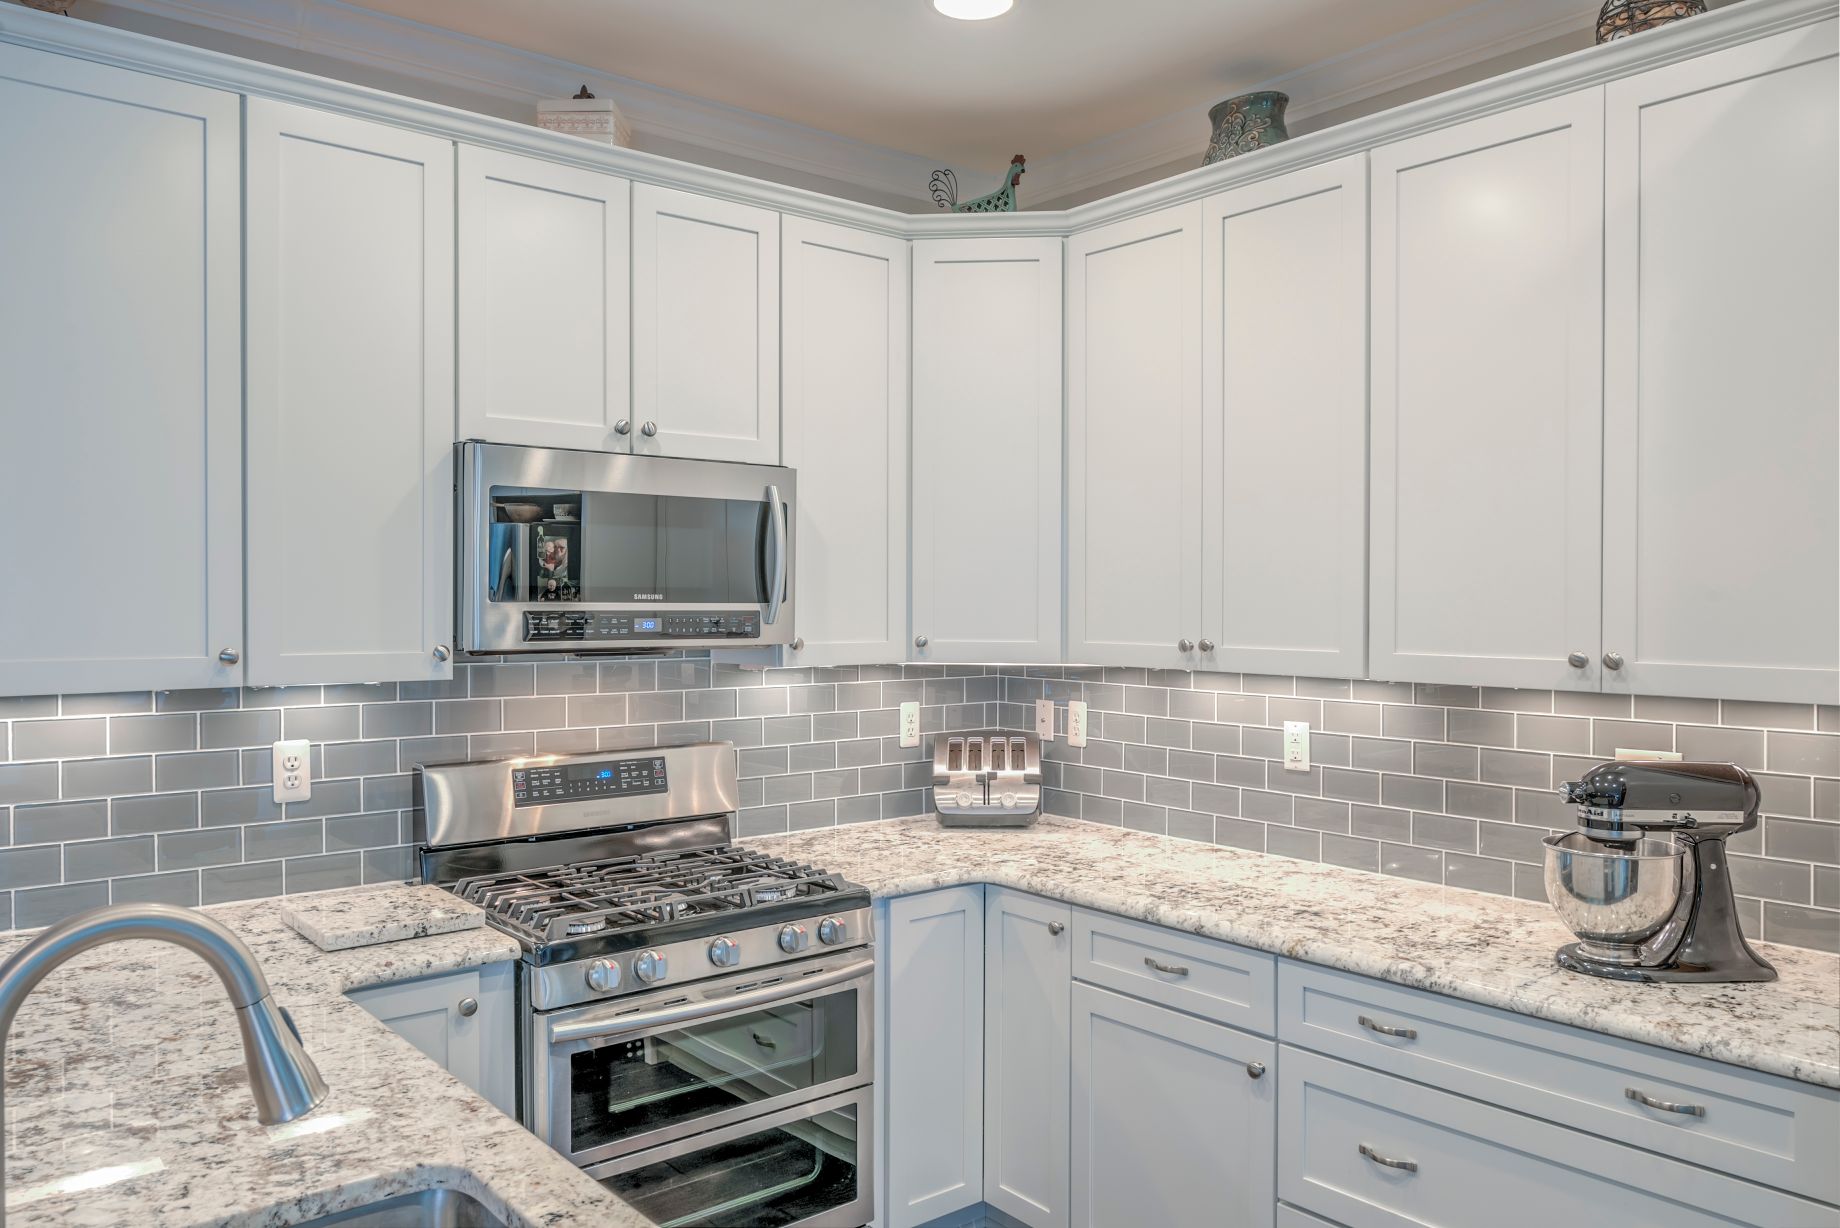 Kitchen Remodel in Shelter Drive, Selbyville DE with White Cabinets and Gray Subway Glass Backsplash Tiles